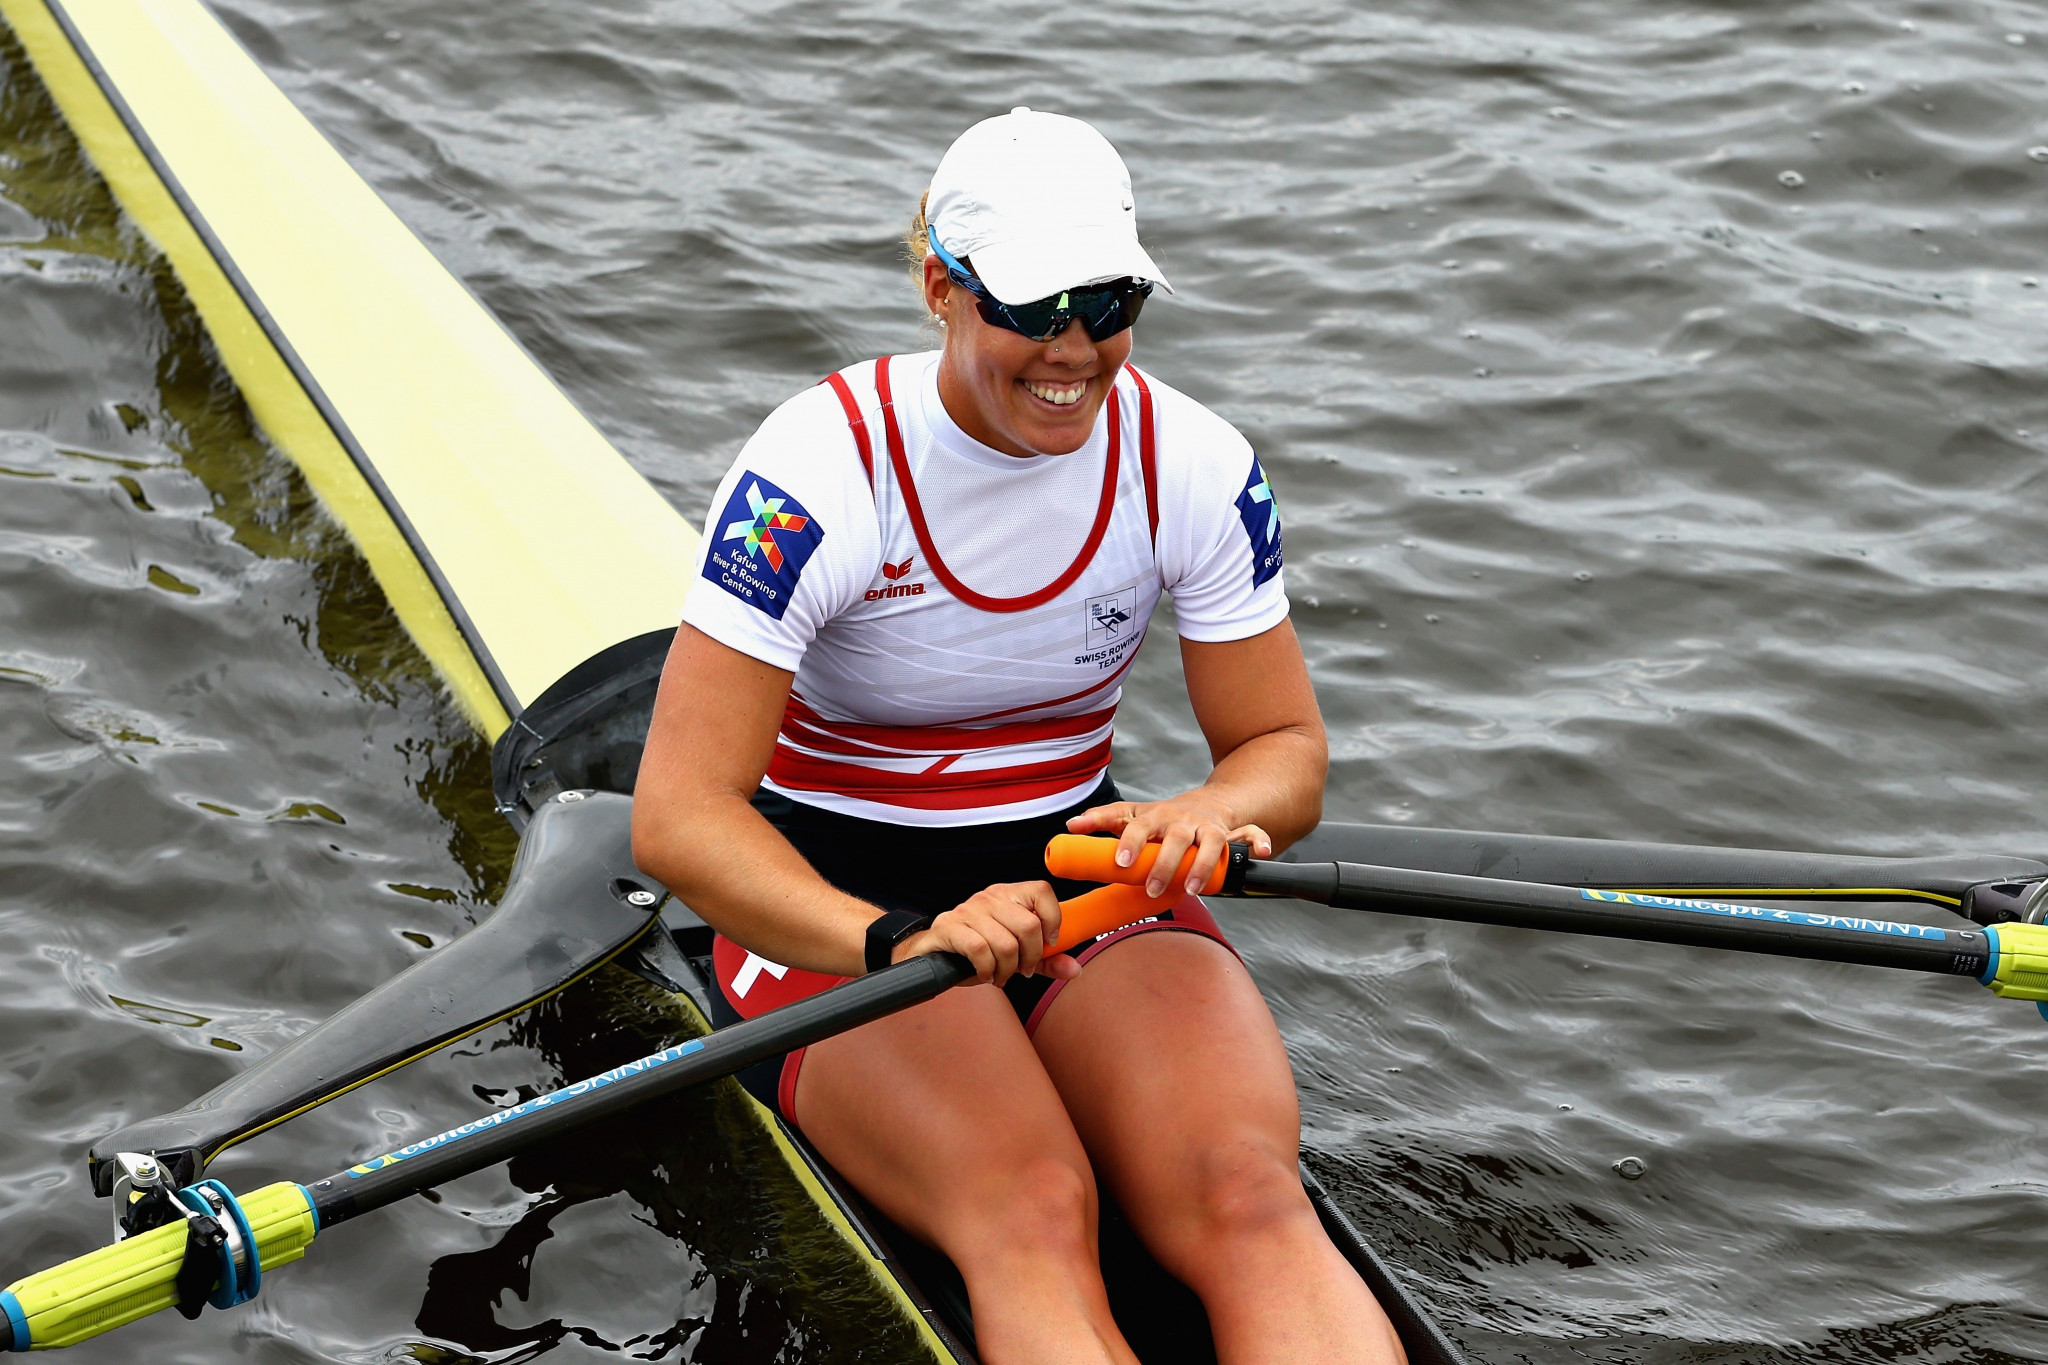 Jeannine Gmelin was one of Switzerland's two gold medallists on the final day of rowing action, winning the women's single sculls A final ©Getty Images